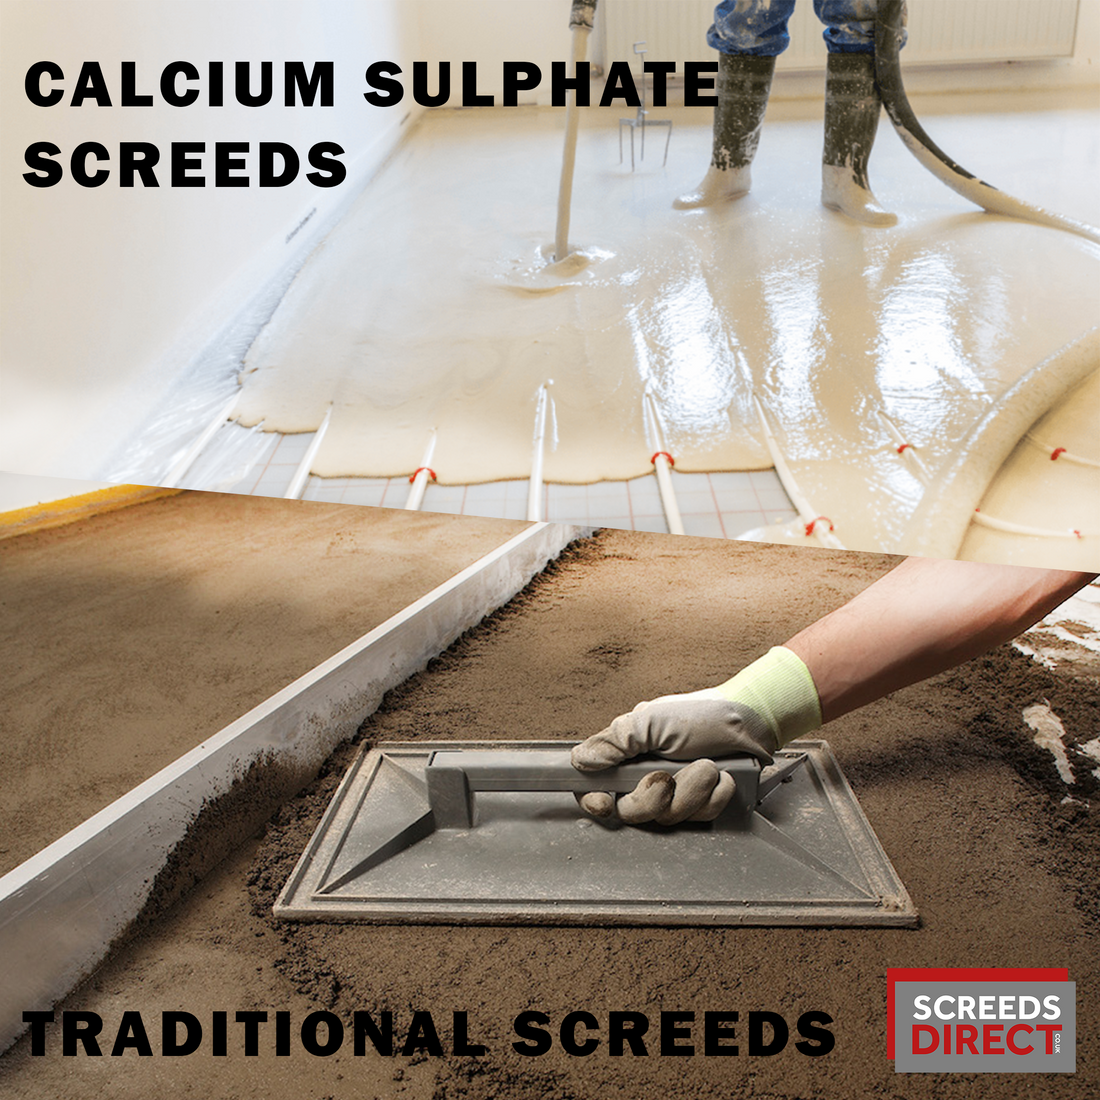 Traditional vs. Calcium Sulphate Screeds: The Complete Comparison